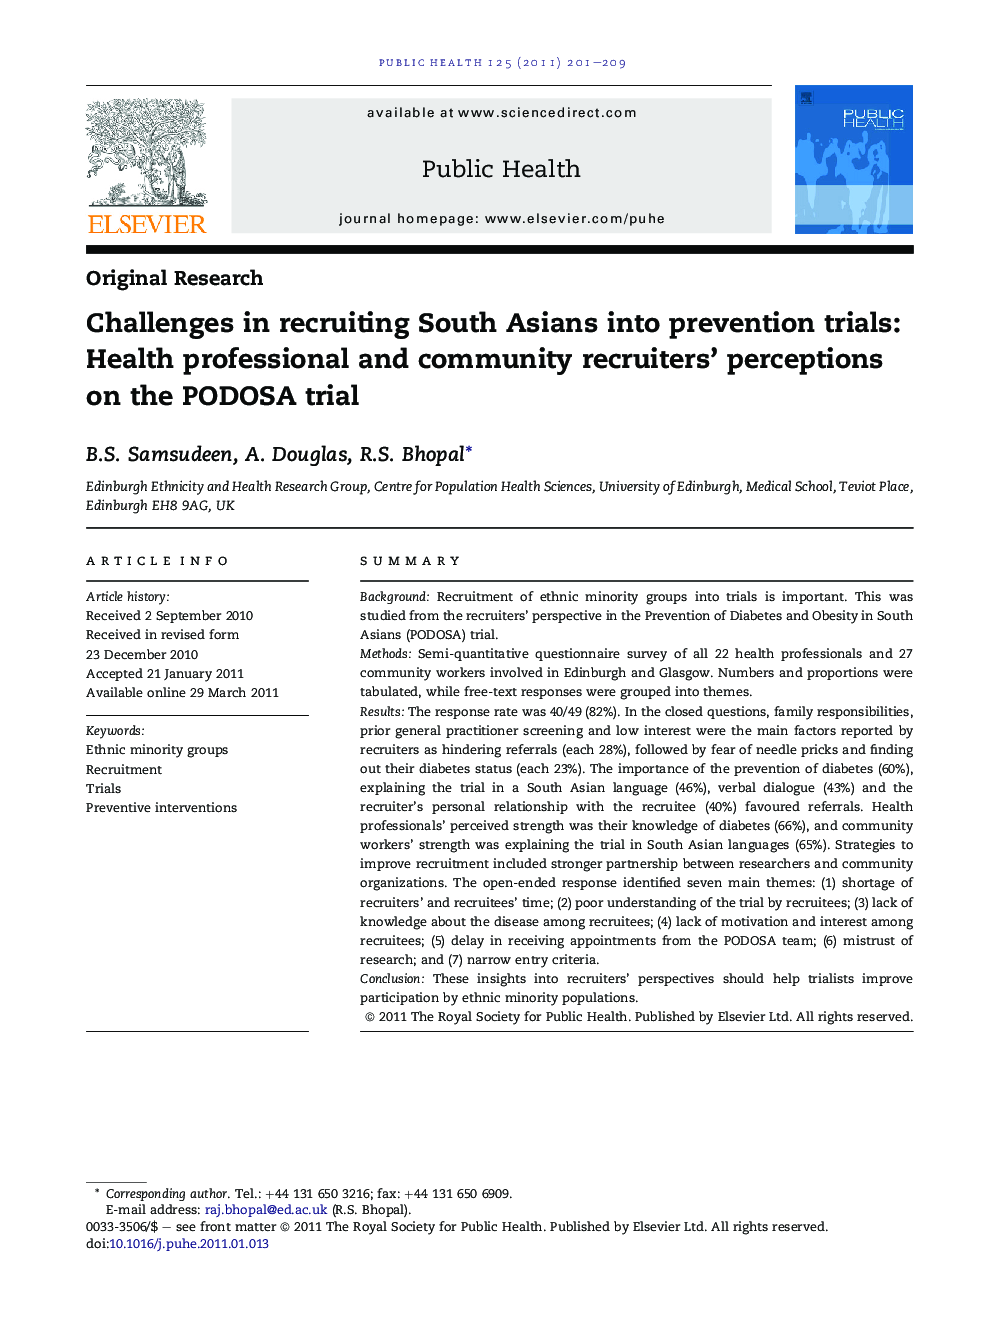 Challenges in recruiting South Asians into prevention trials: Health professional and community recruiters’ perceptions on the PODOSA trial